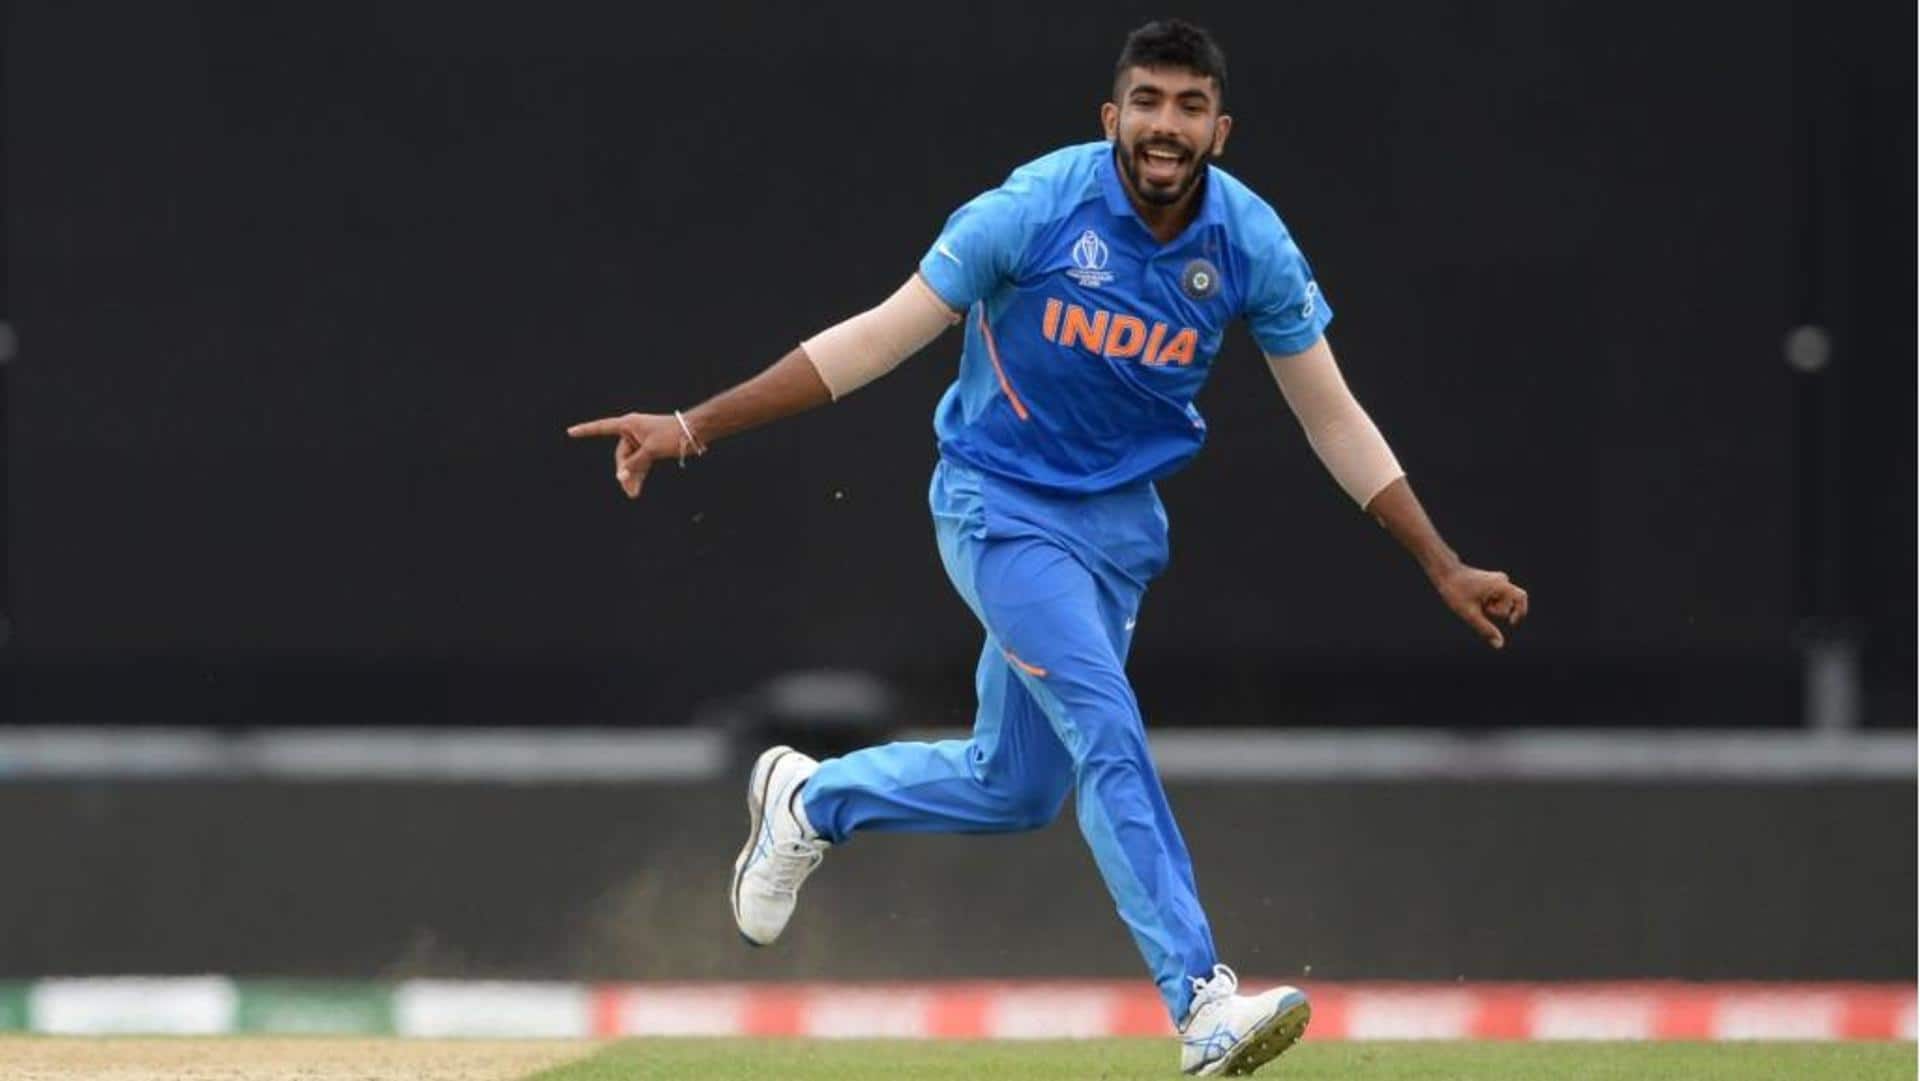 Jasprit Bumrah set to make his much-awaited comeback: Details here